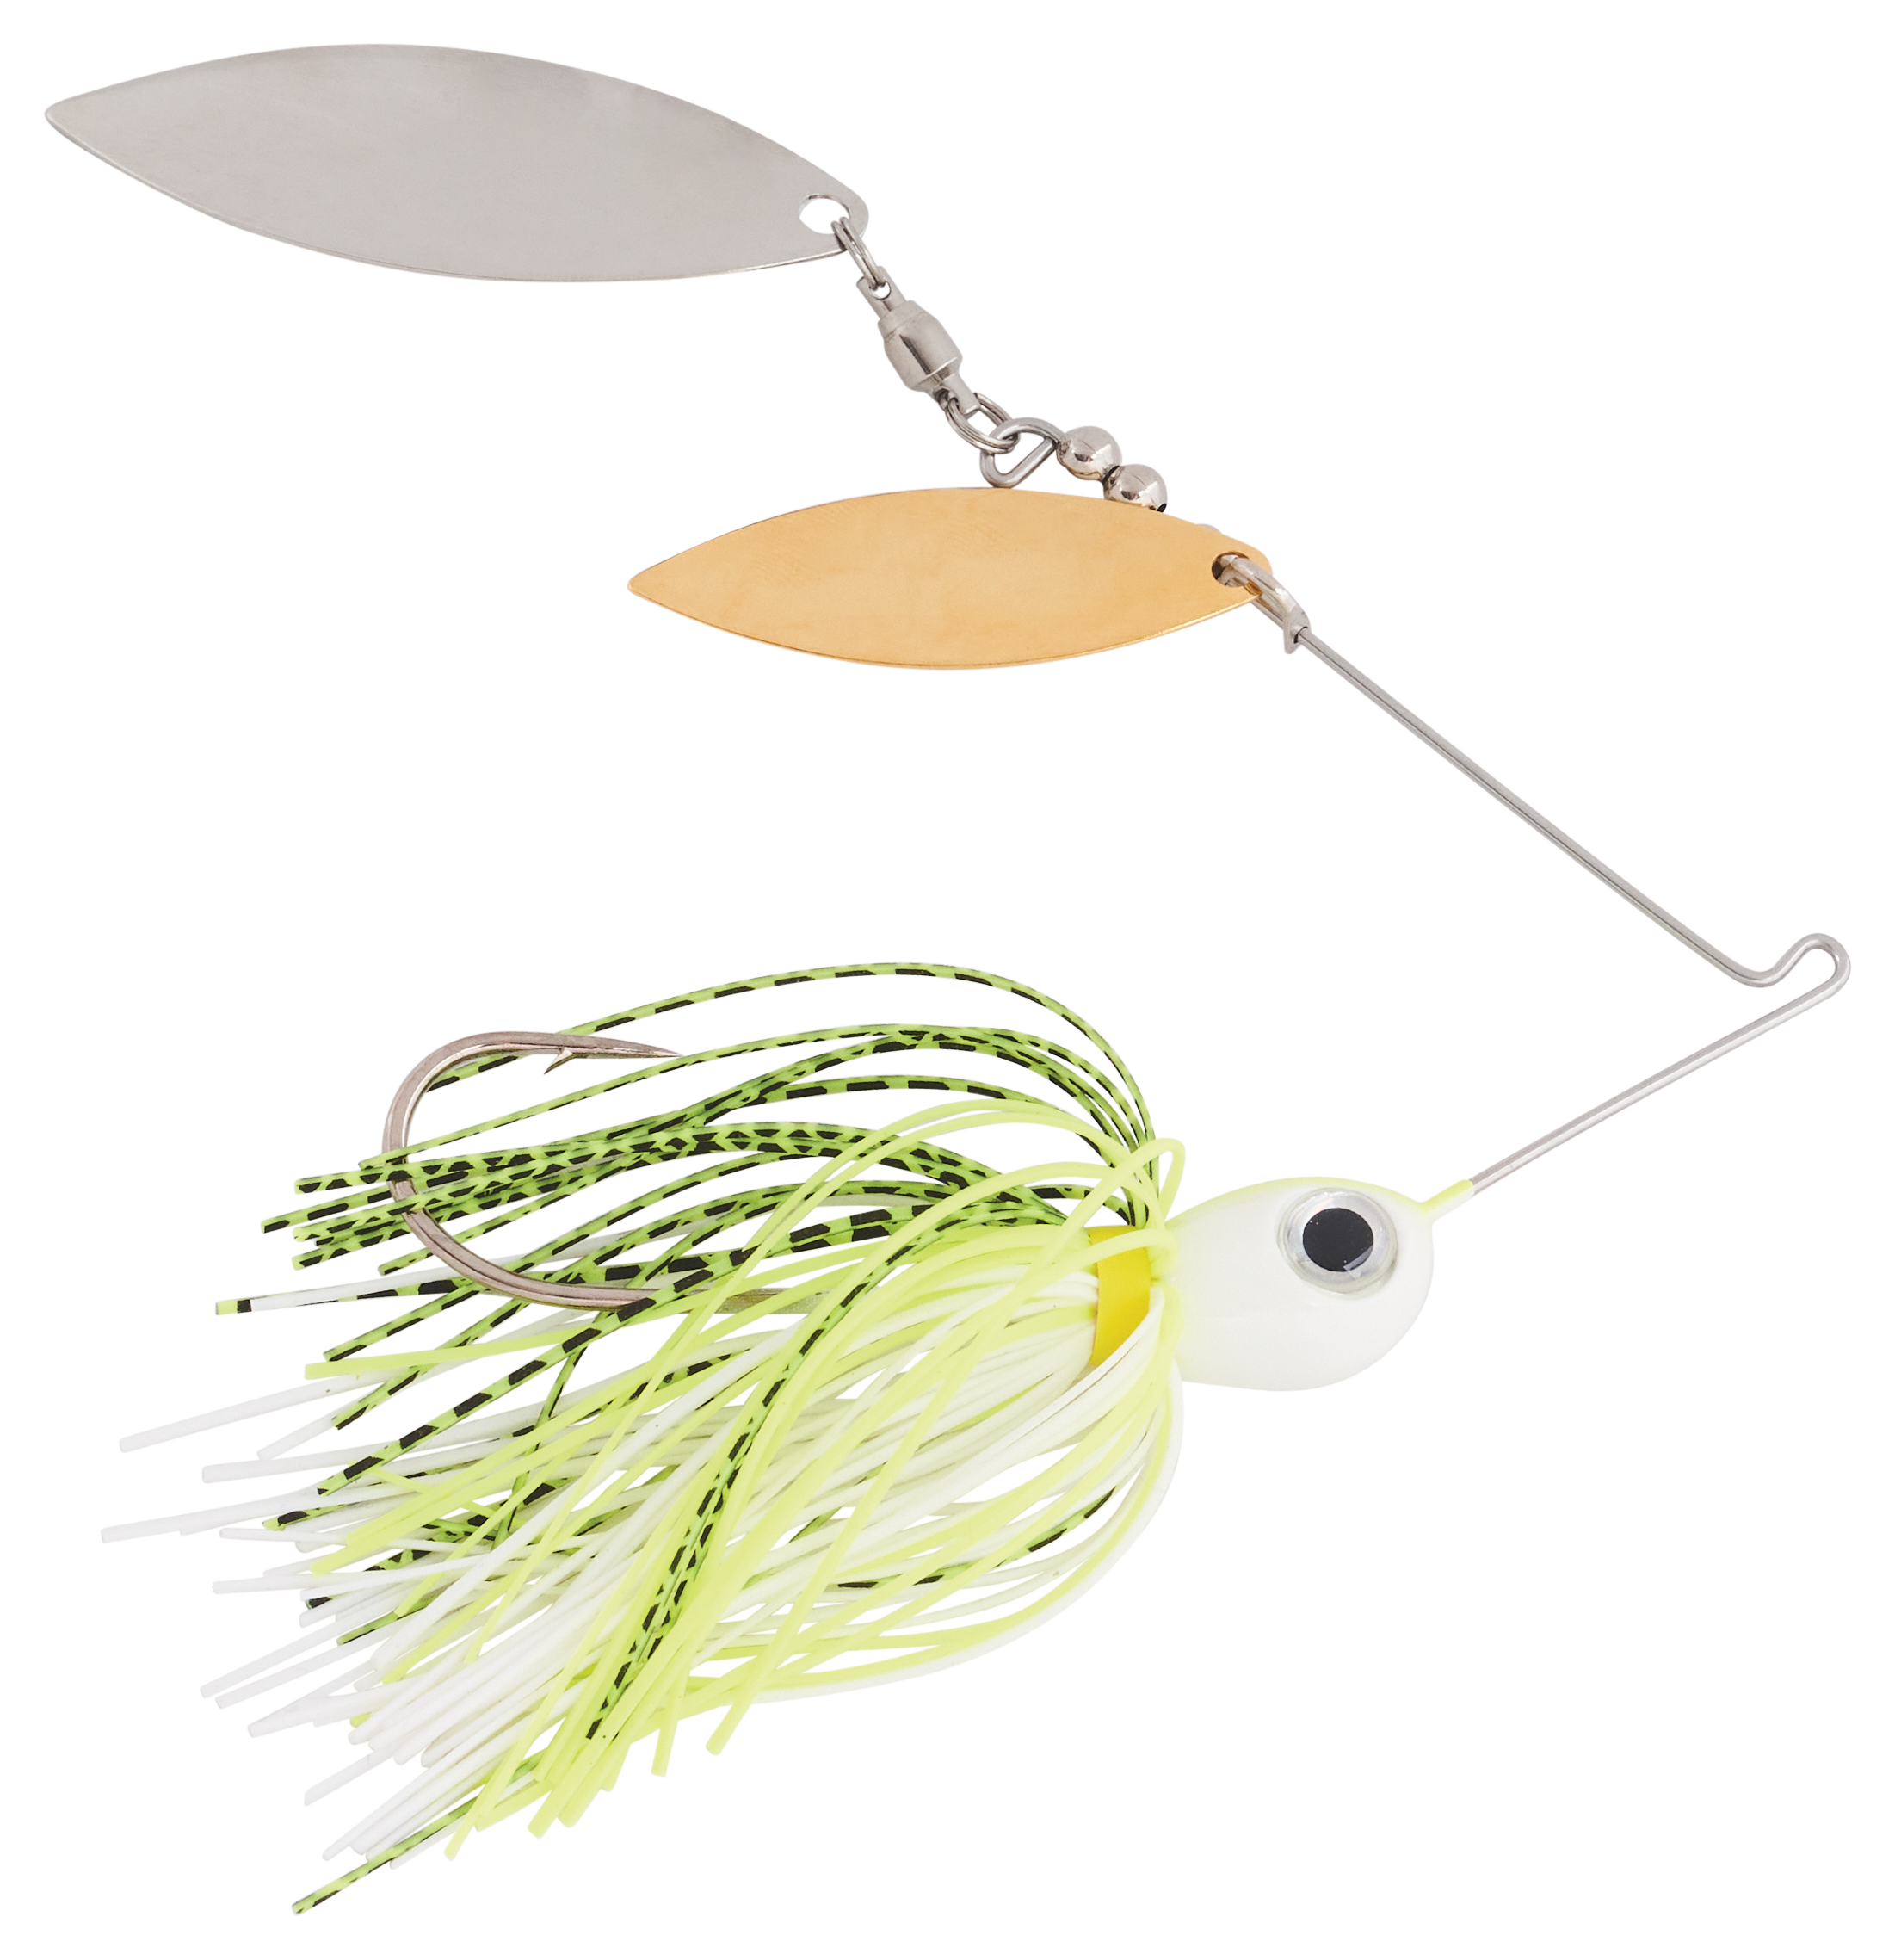 Spro Blade Double Willow Spinnerbait 3/8 oz / Citrus Shad